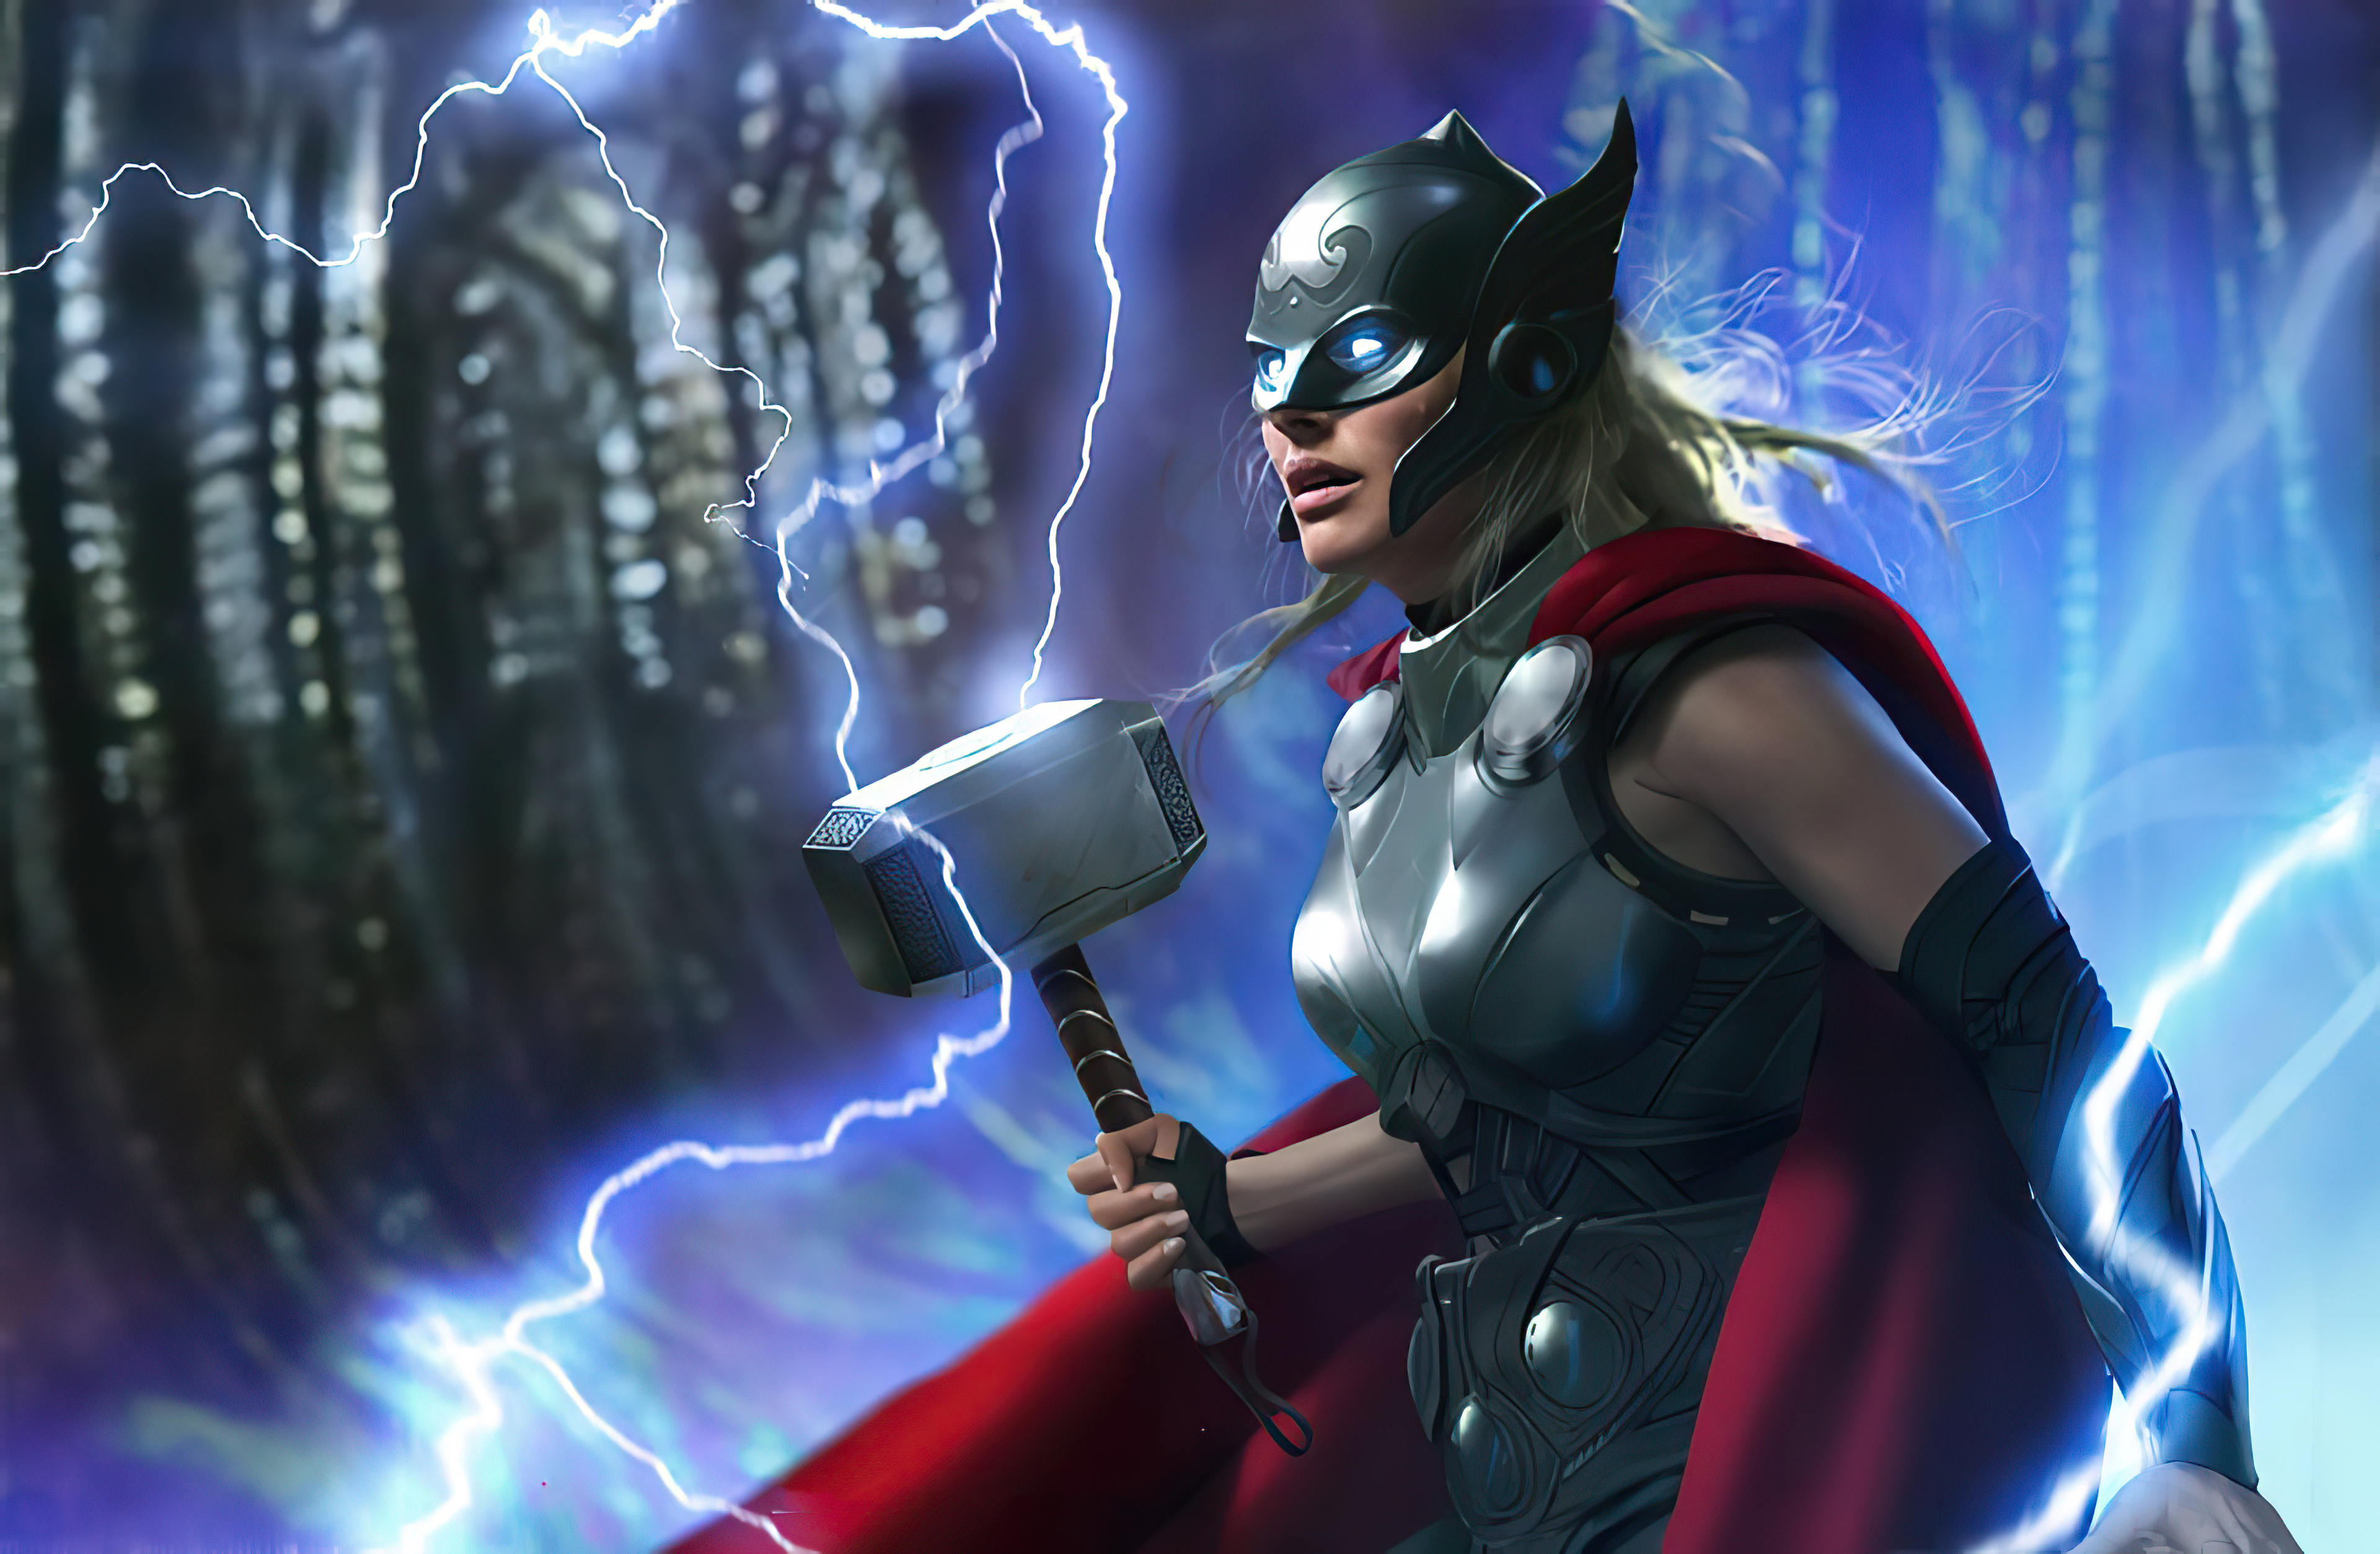 Thor Love And Thunder 4K Jane Foster Art Wallpapers